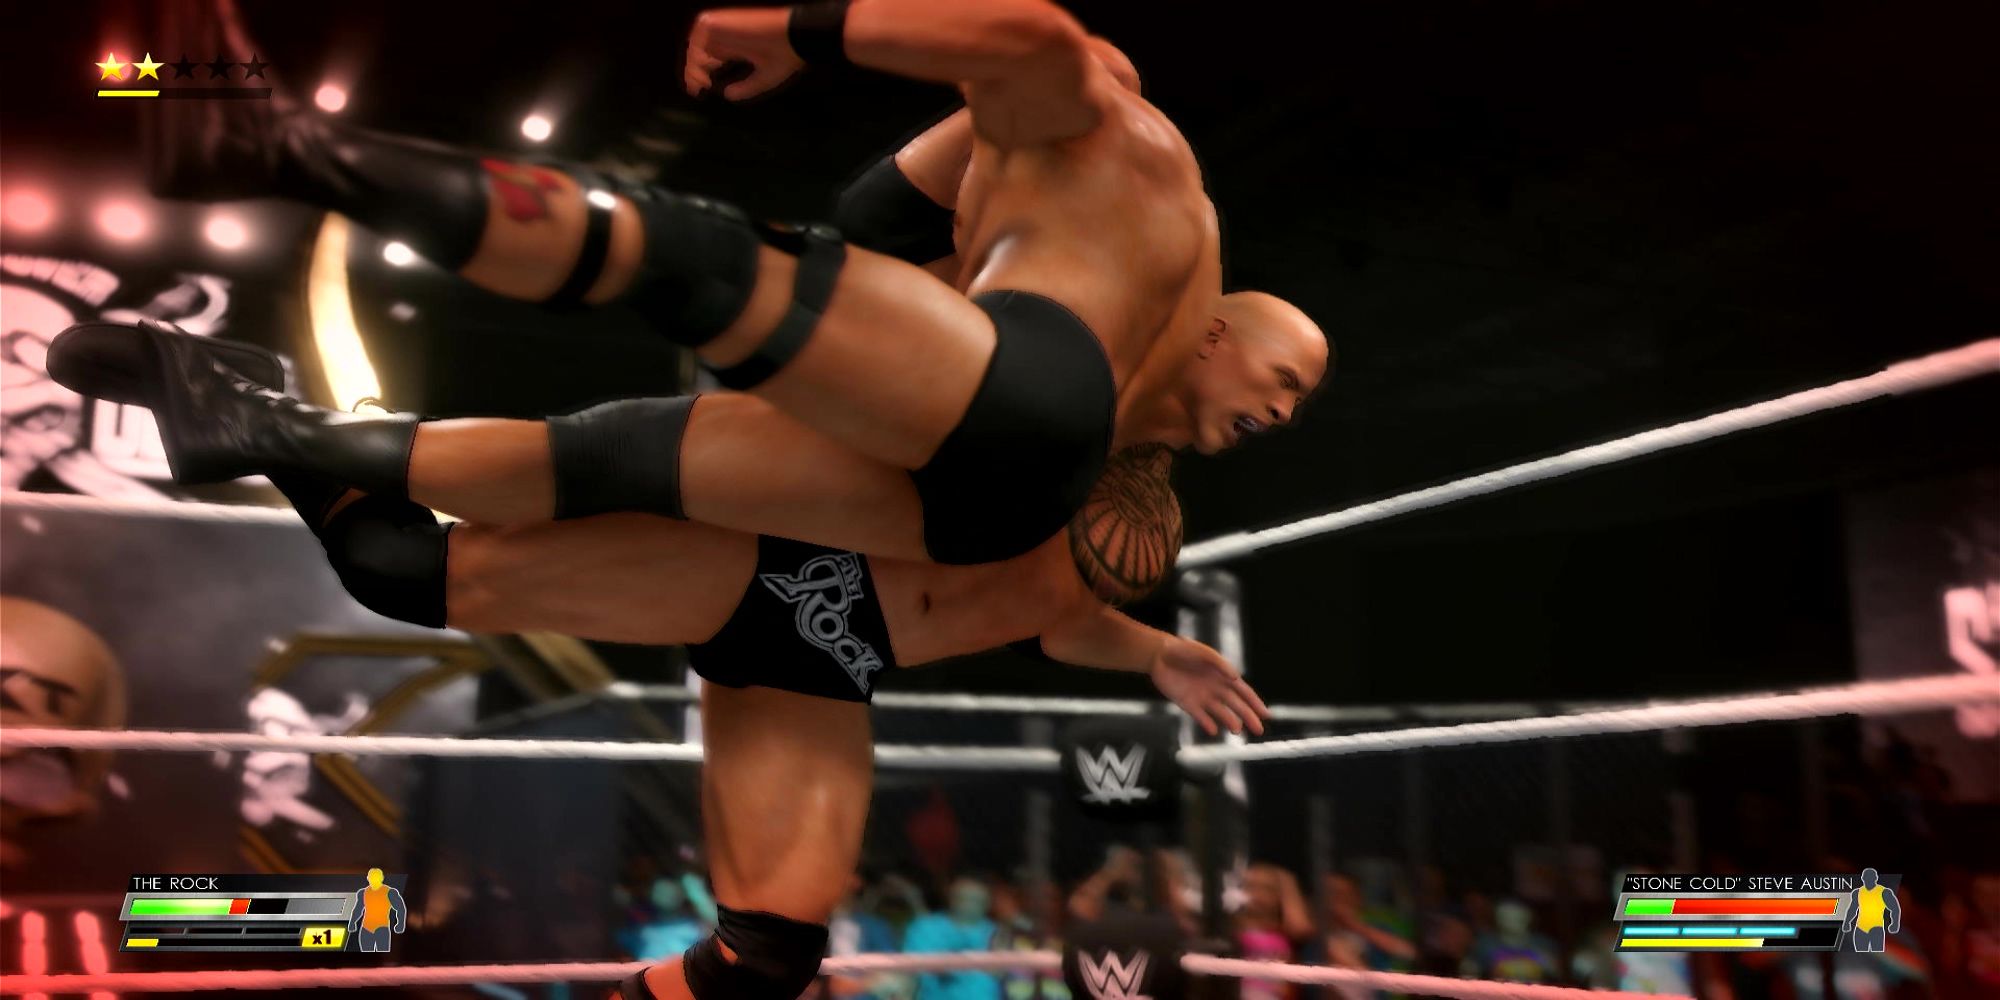 The Rock slams Stone Cold Steve Austin into the ground with The Rock Bottom at NXT: Stand And Deliver. WWE 2K22.